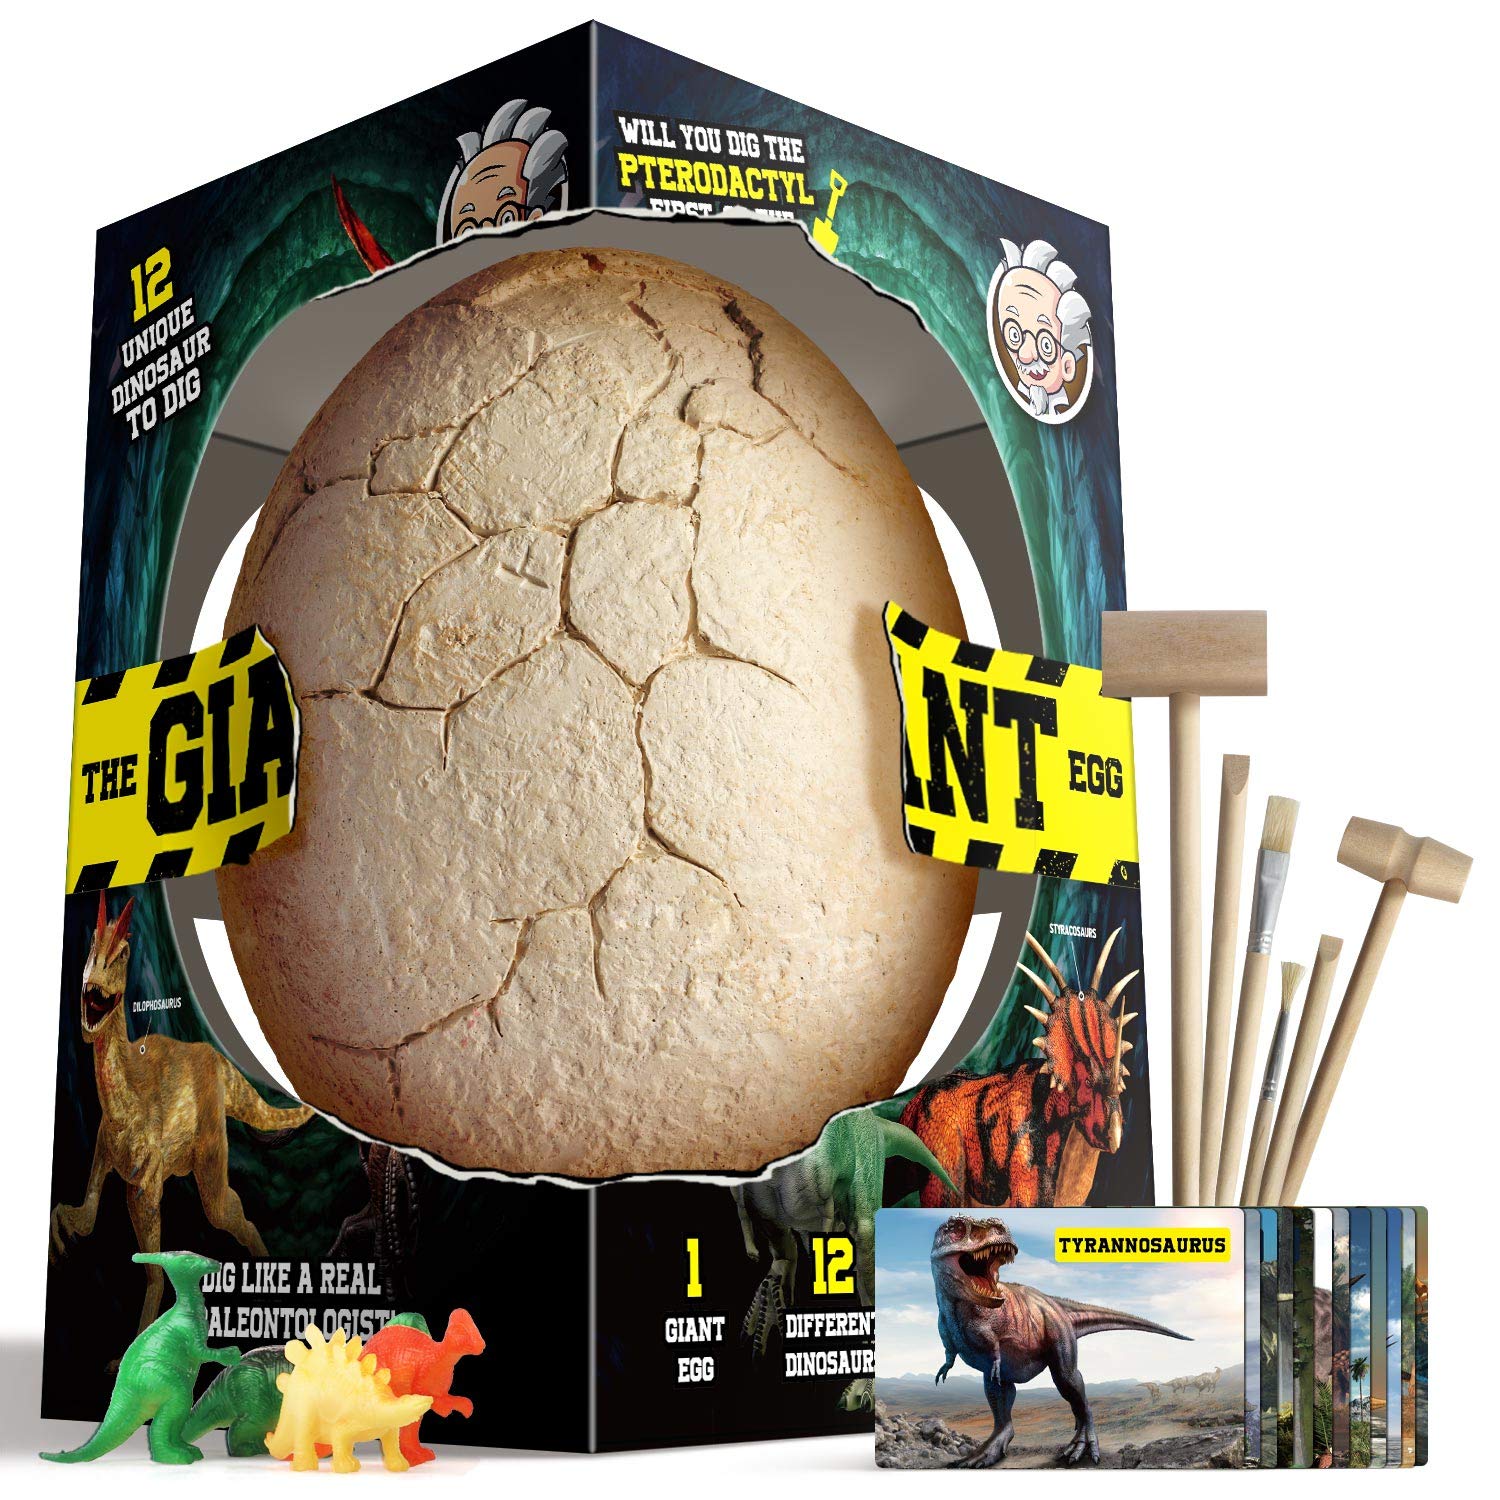 XXTOYS Dino Egg Dig Kit Dinosaur Eggs Jumbo Dino Egg with 12 Different Dinosaur Toys Dino Egg Kit for 5 Kids with 6 Digging Tools Party Archaeology Paleontology Educational Science Gift for Age 3-5